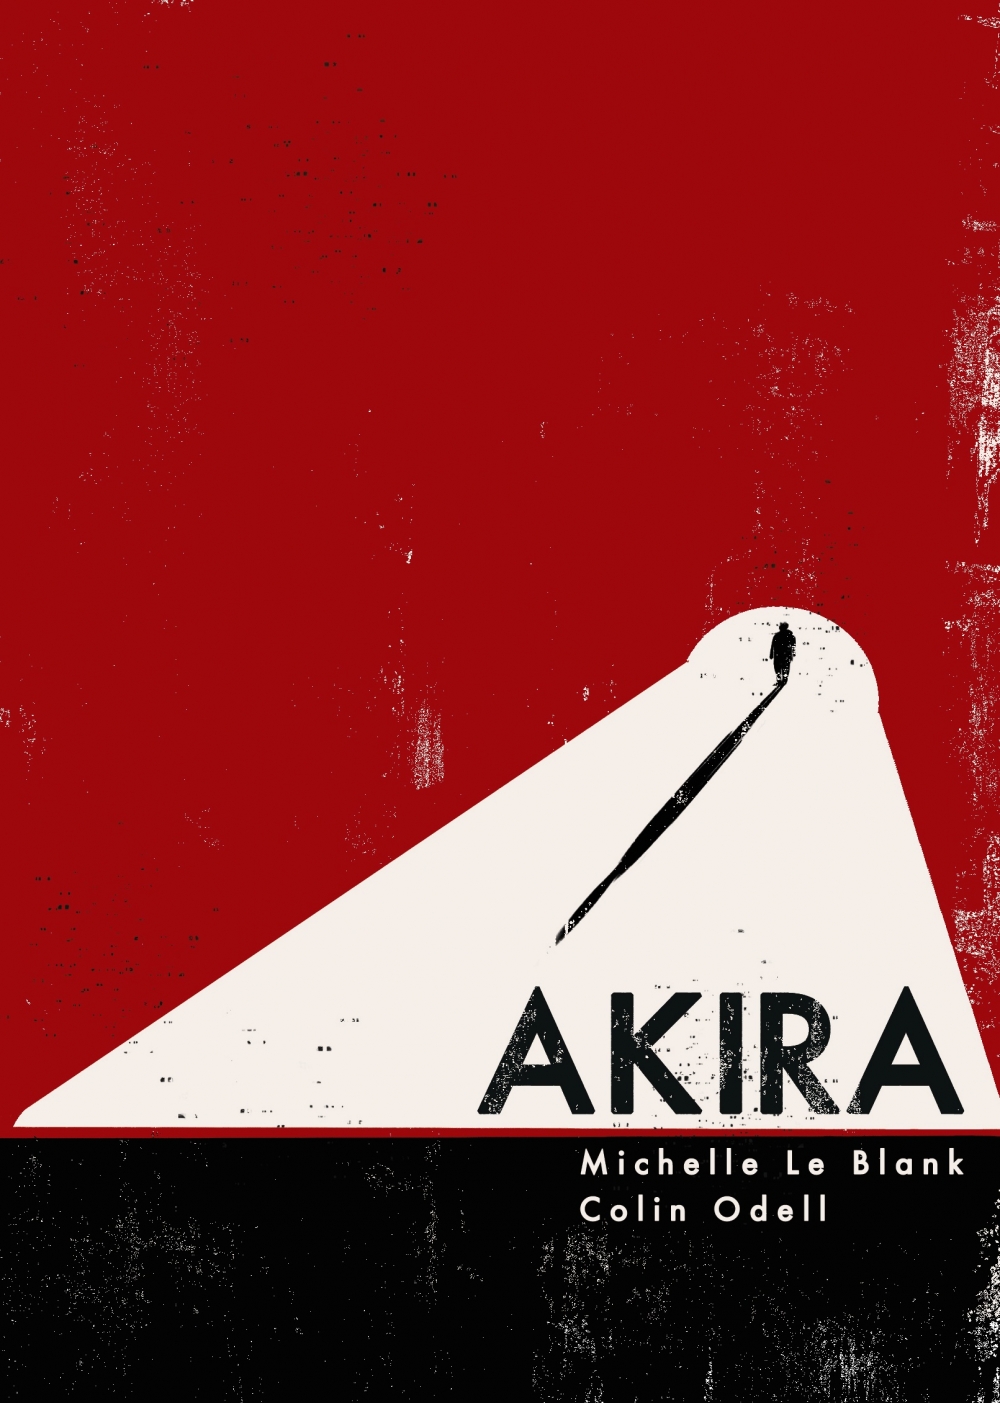 (The cover by Samantha Holmlund that won the BFI Film Classics competition for "Akira.")